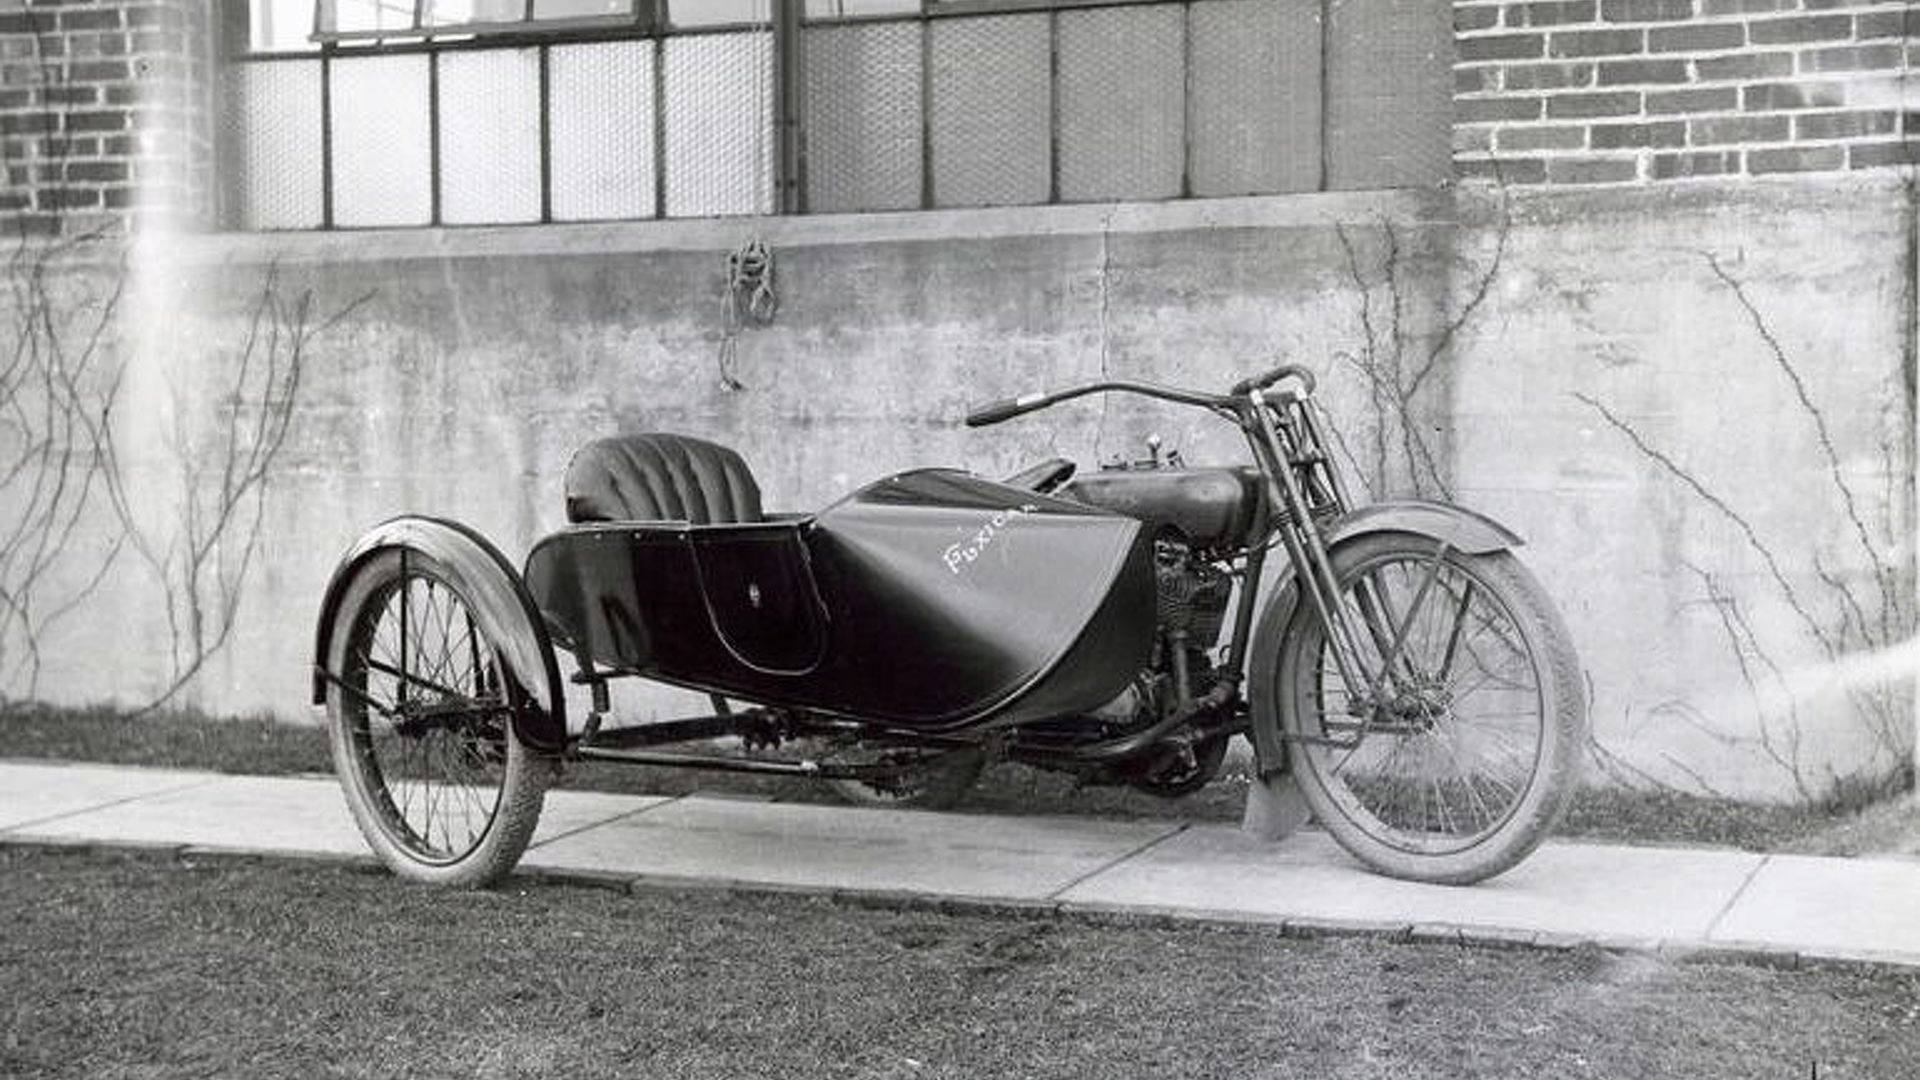 the-flxible-side-car-a-different-angle-on-sidecar-design.jpg